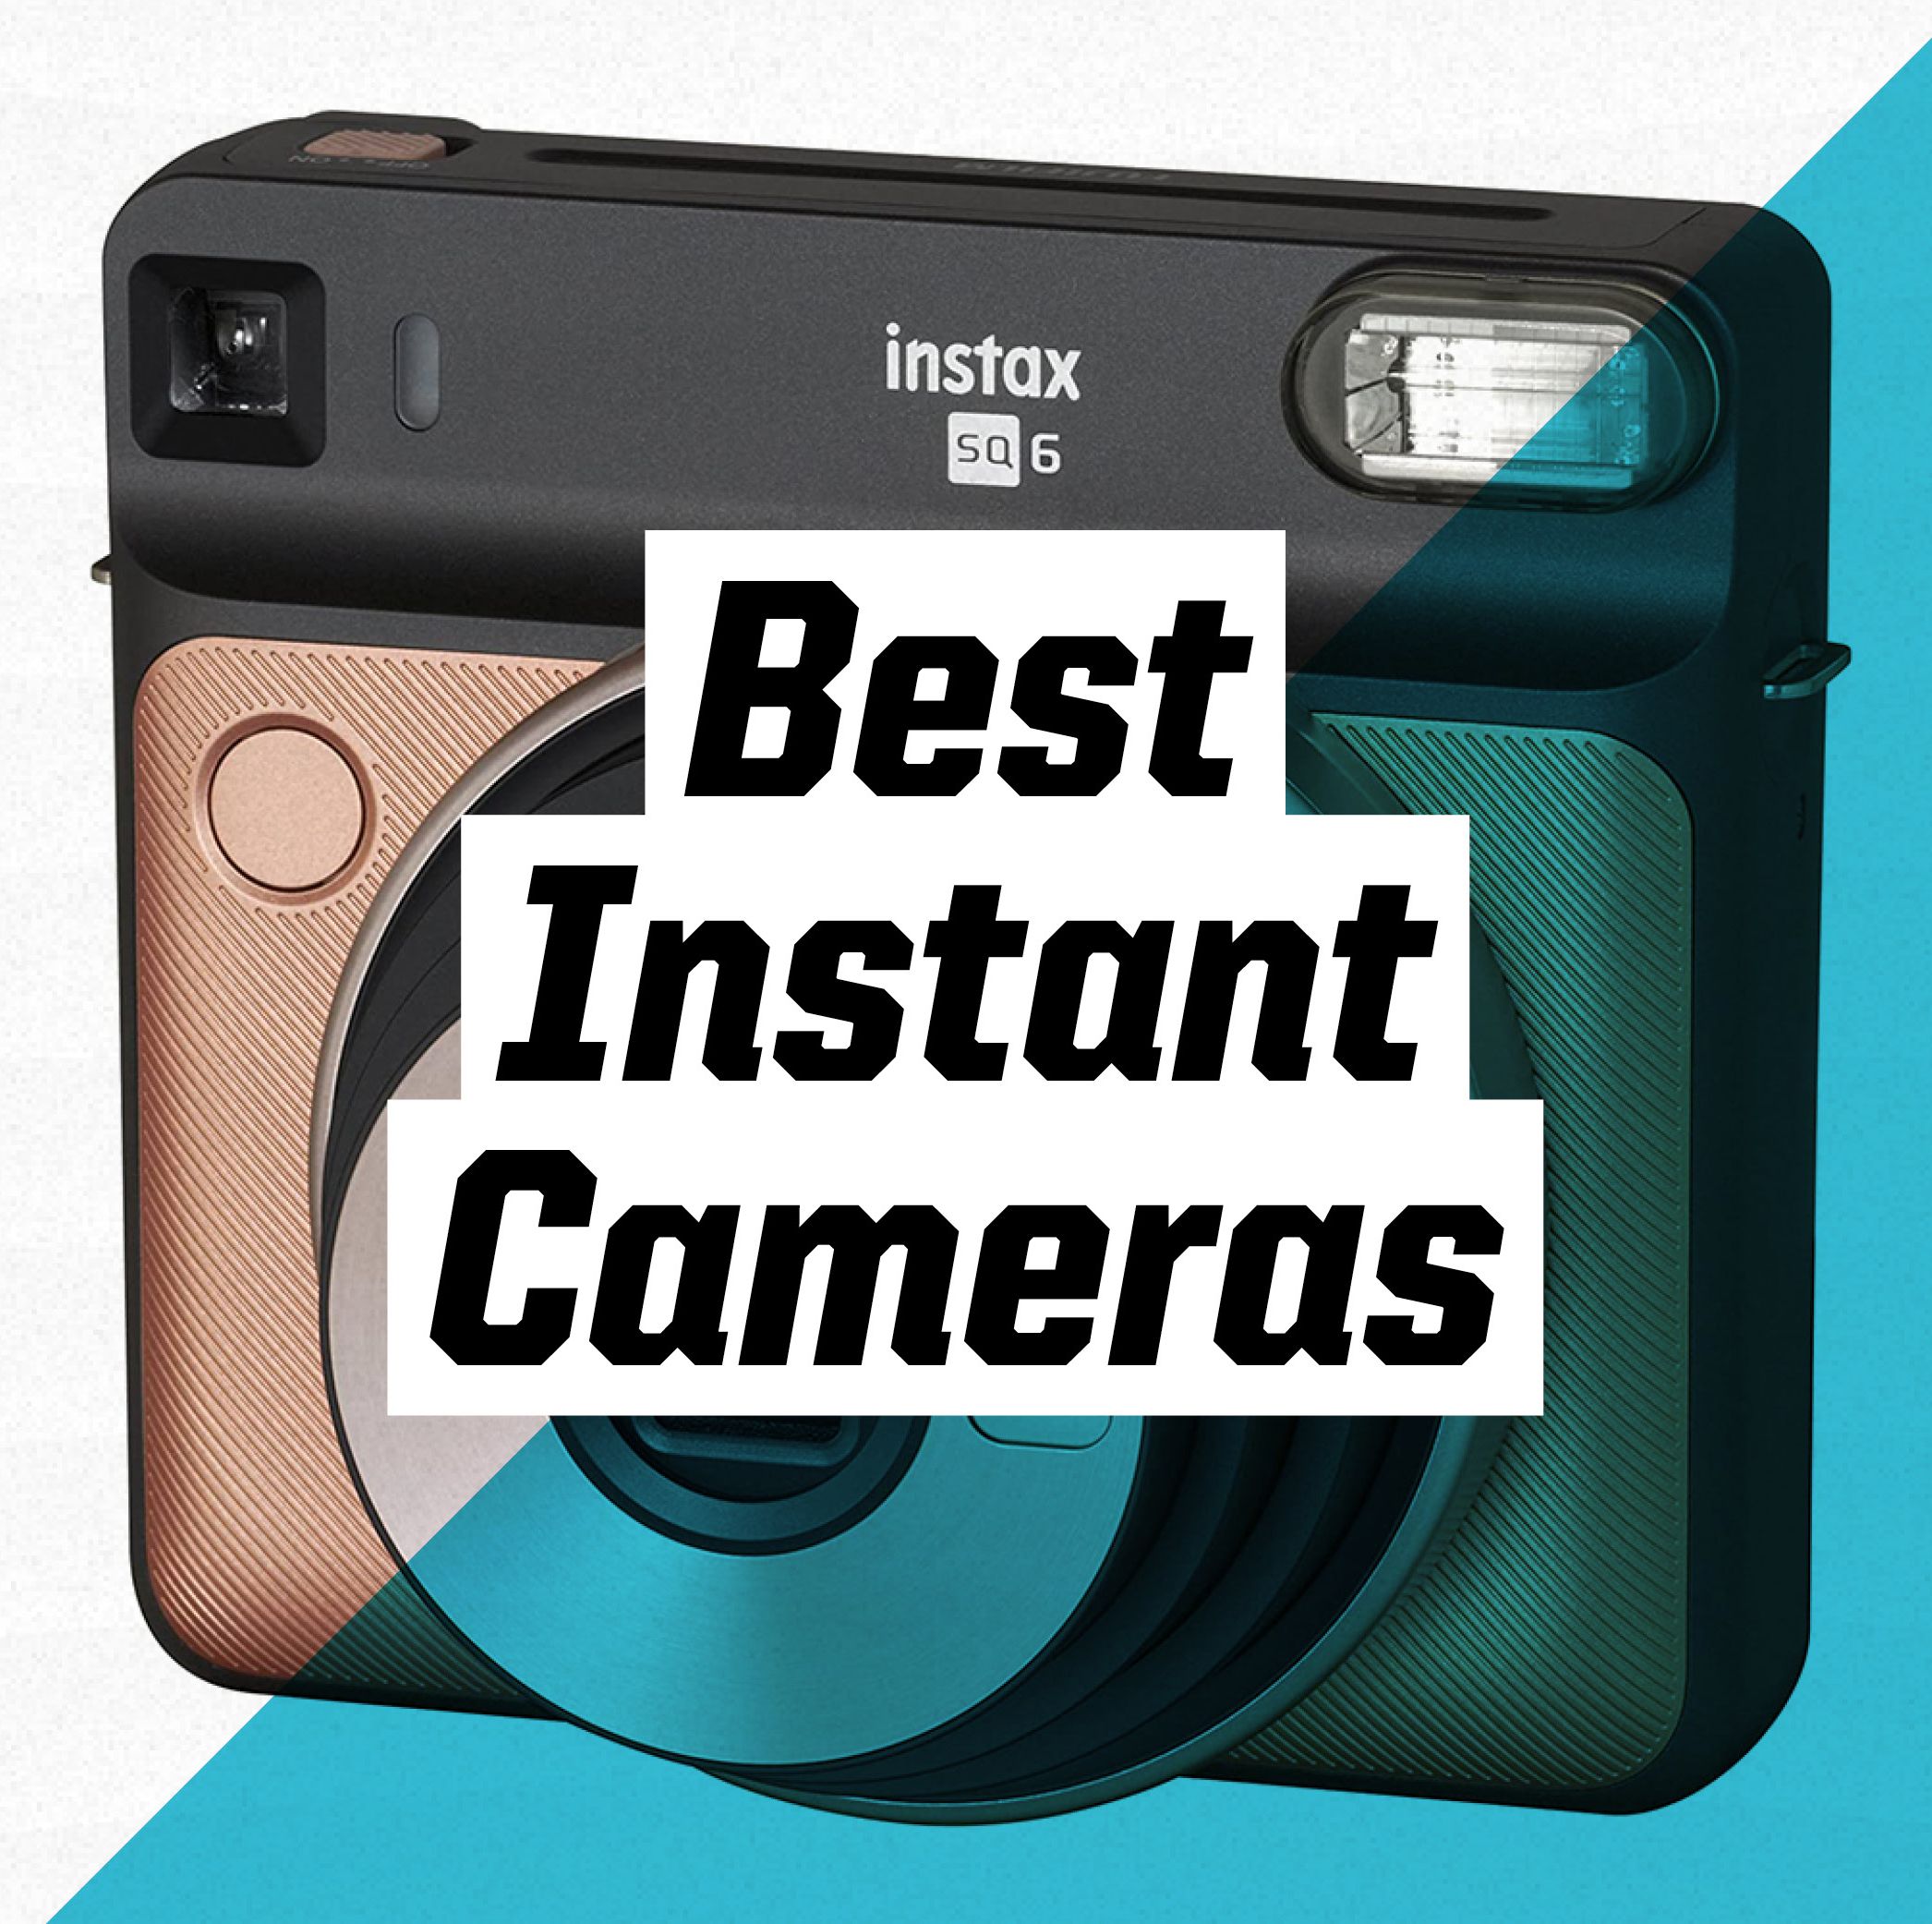 The Best Instant Cameras to Capture Your Favorite Moments